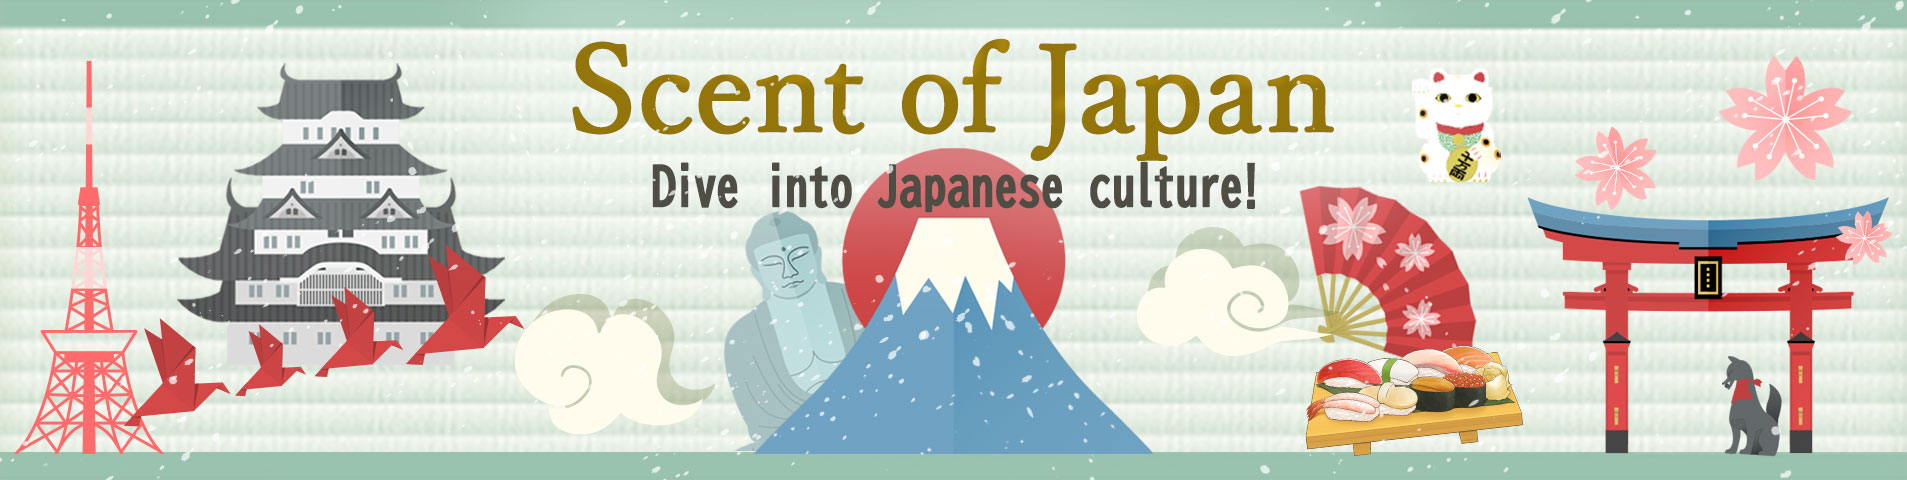 Scent of Japan　-Dive into Japanese culture!-